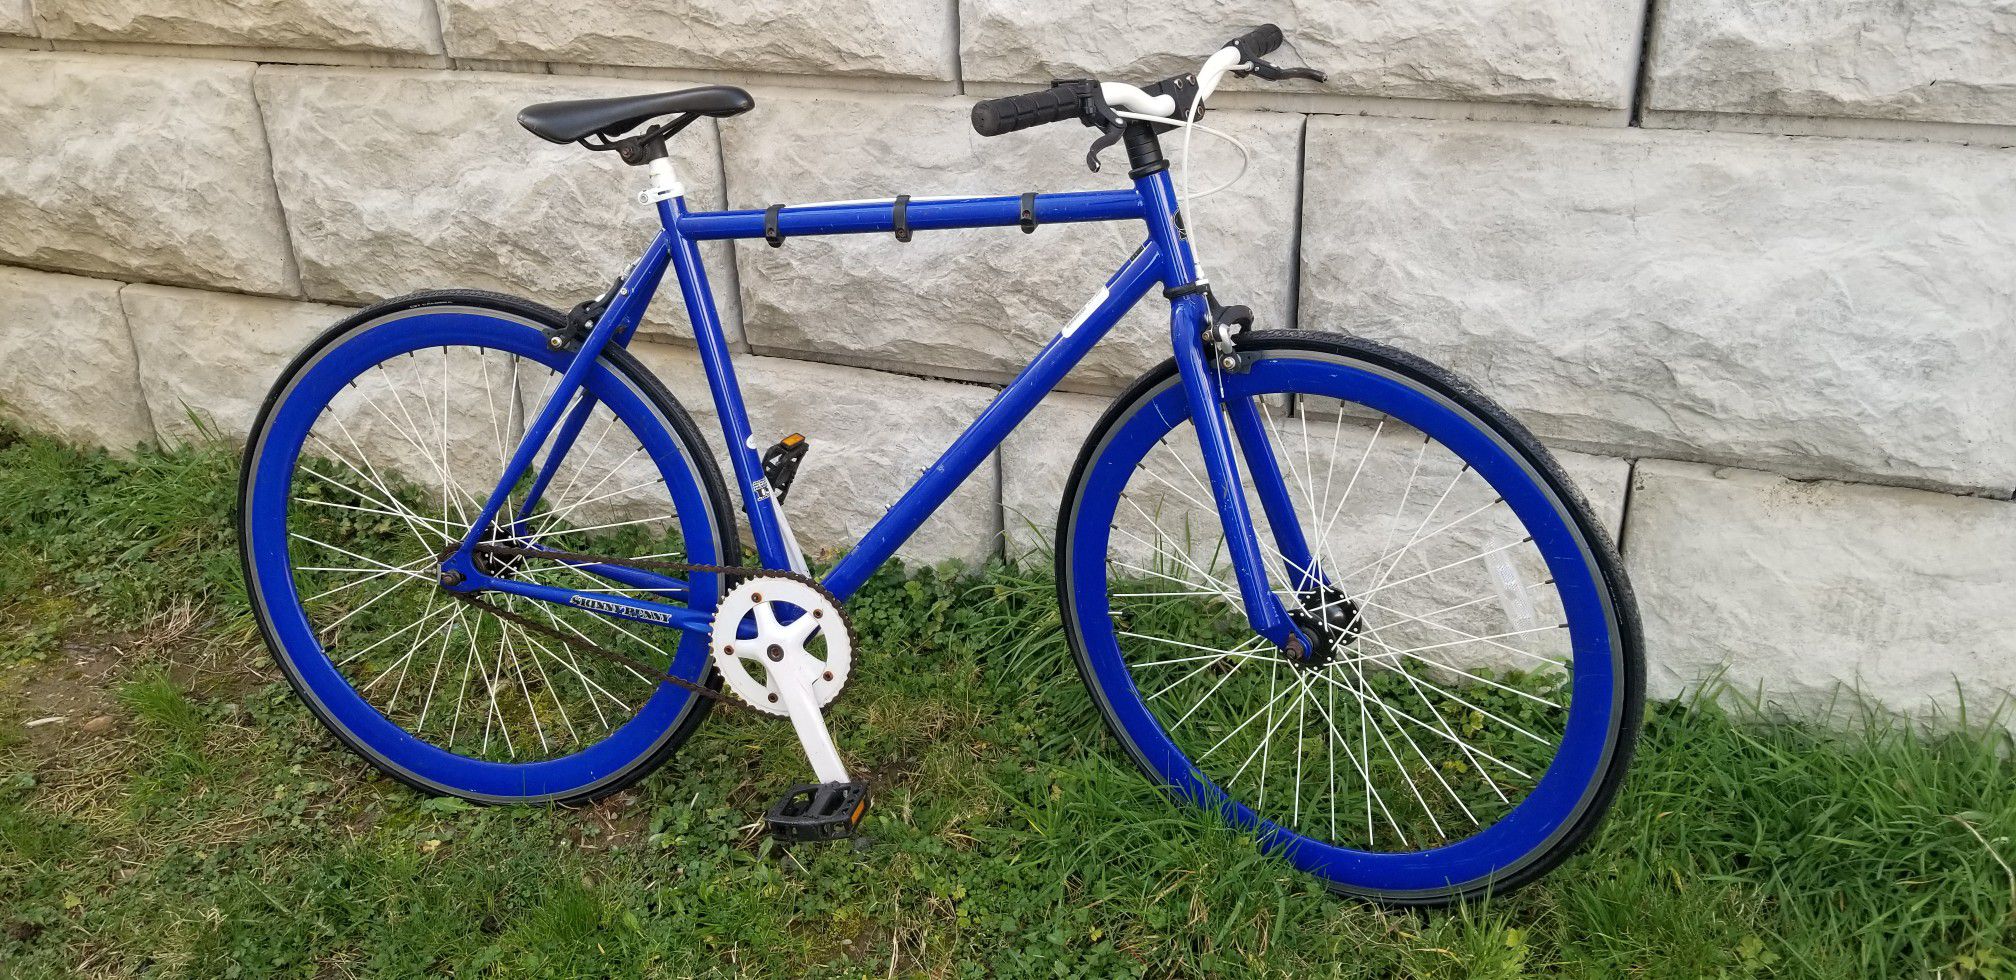 Single Speed Bicycle comes with new tires